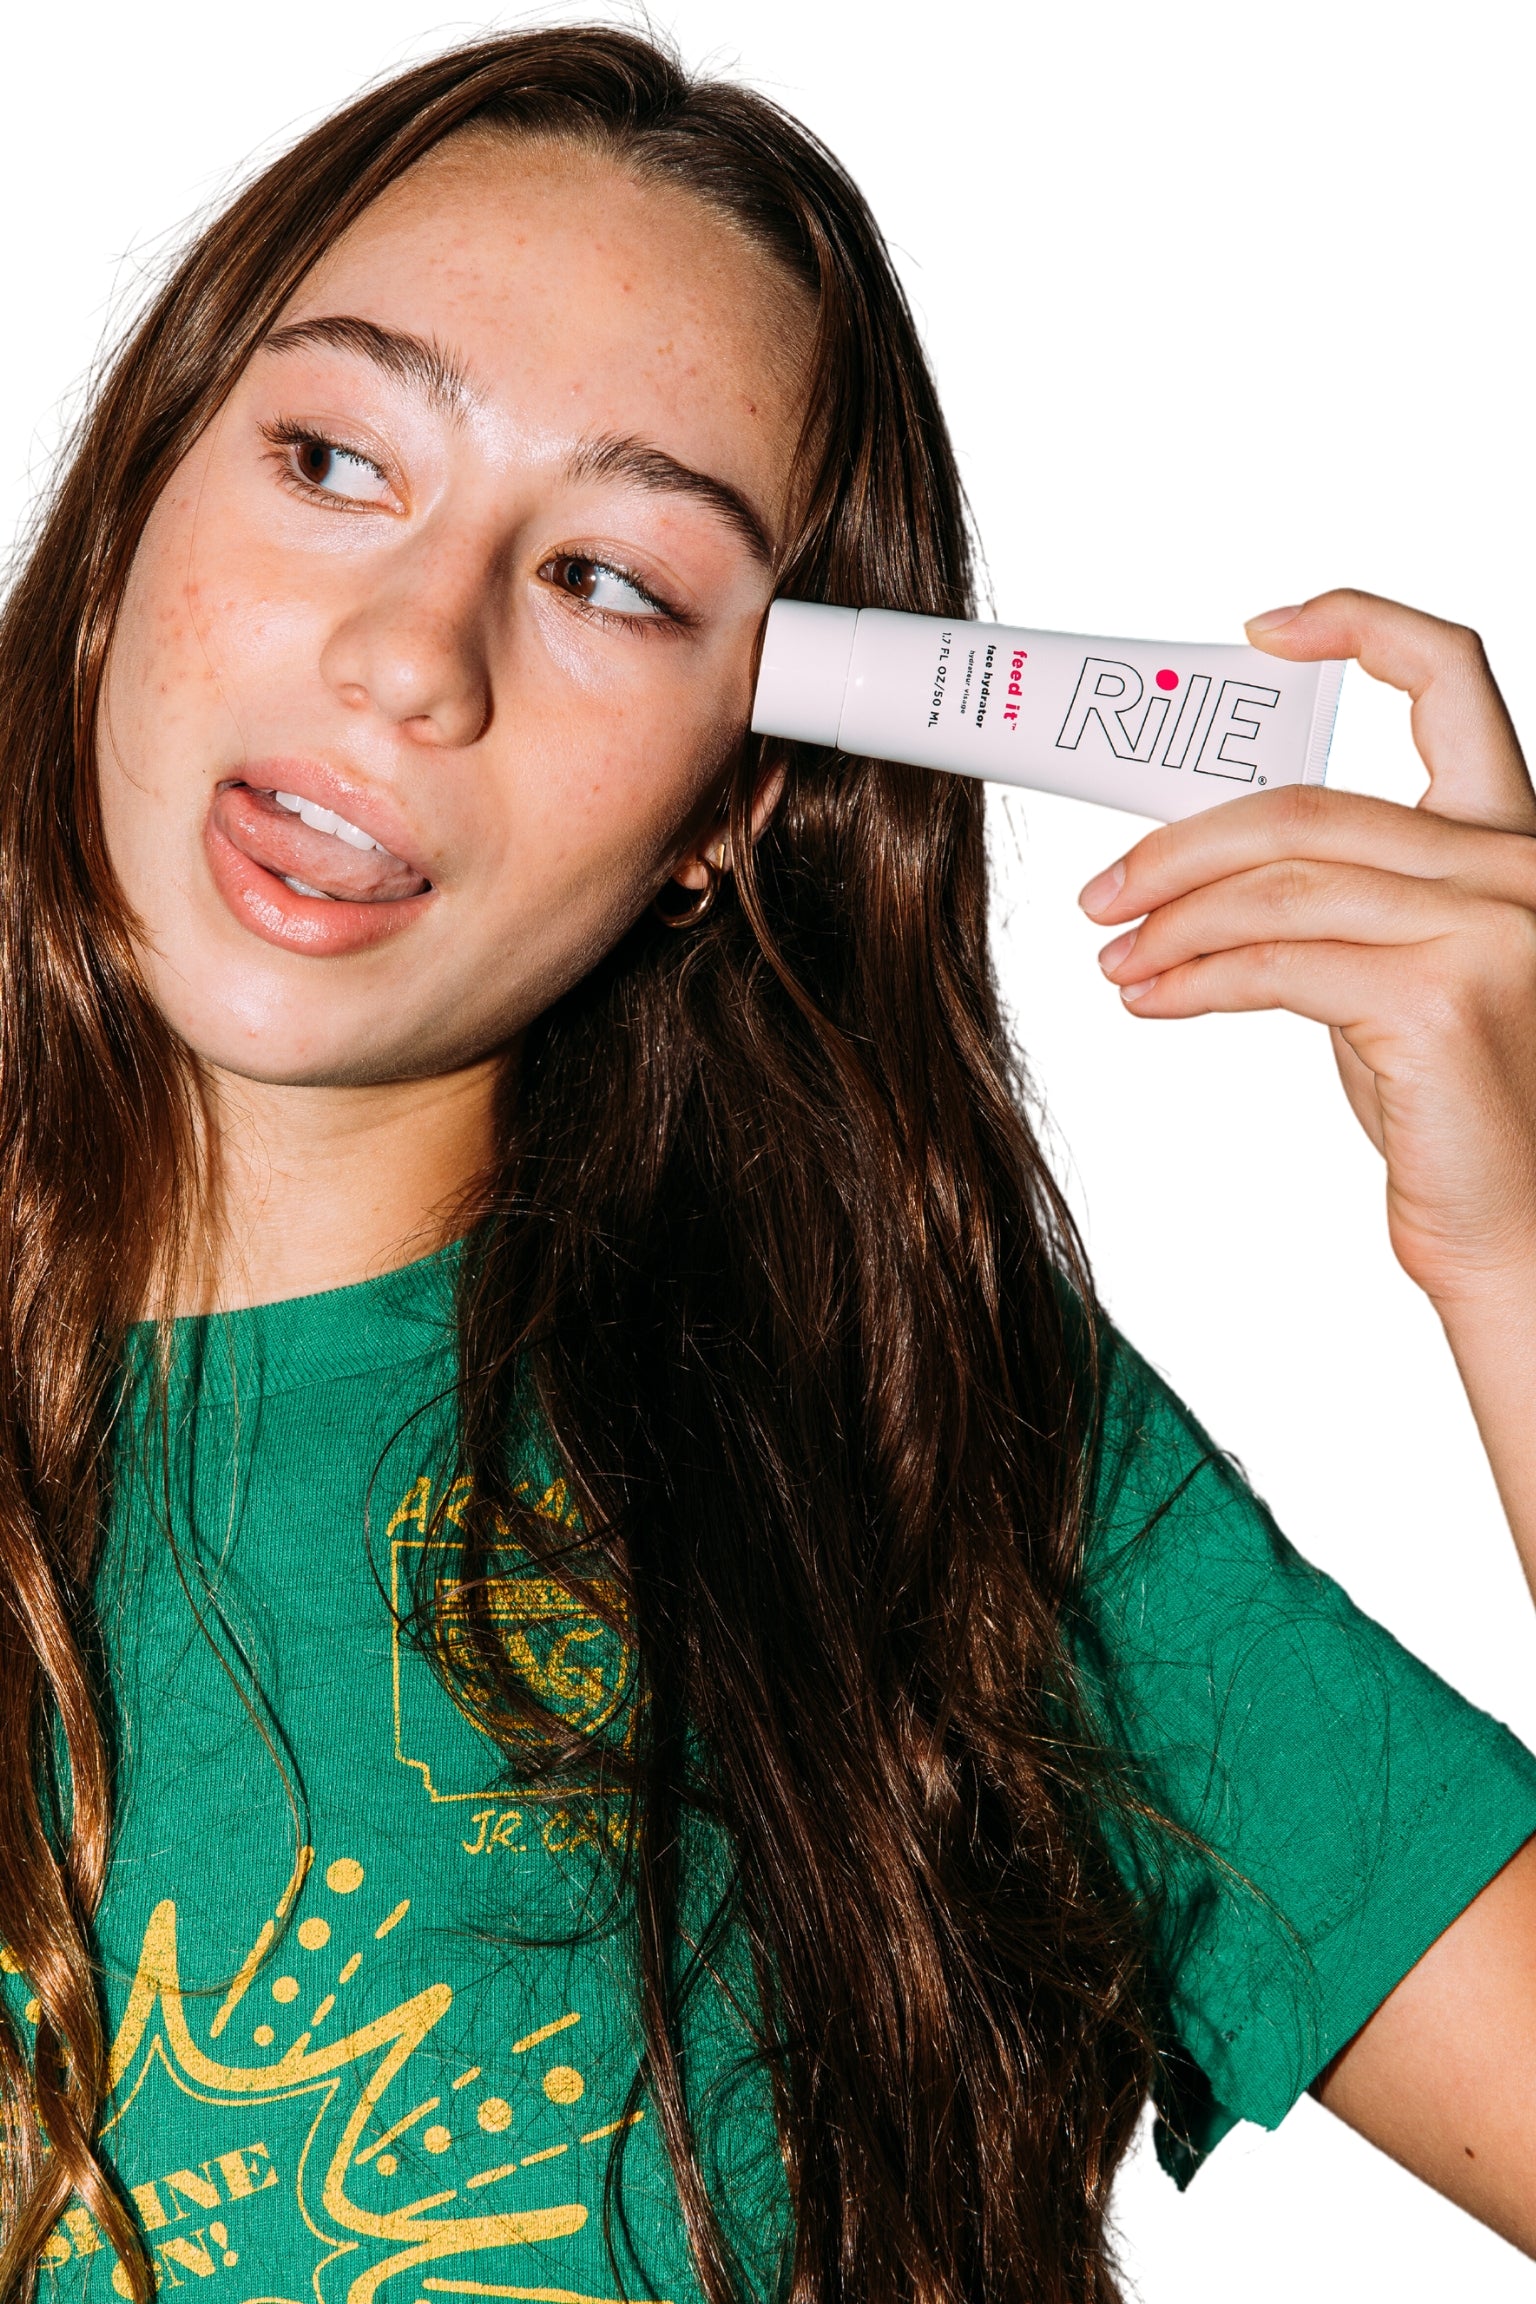 A young teen or tween girl is holding the Rile hydrator moisturizer.